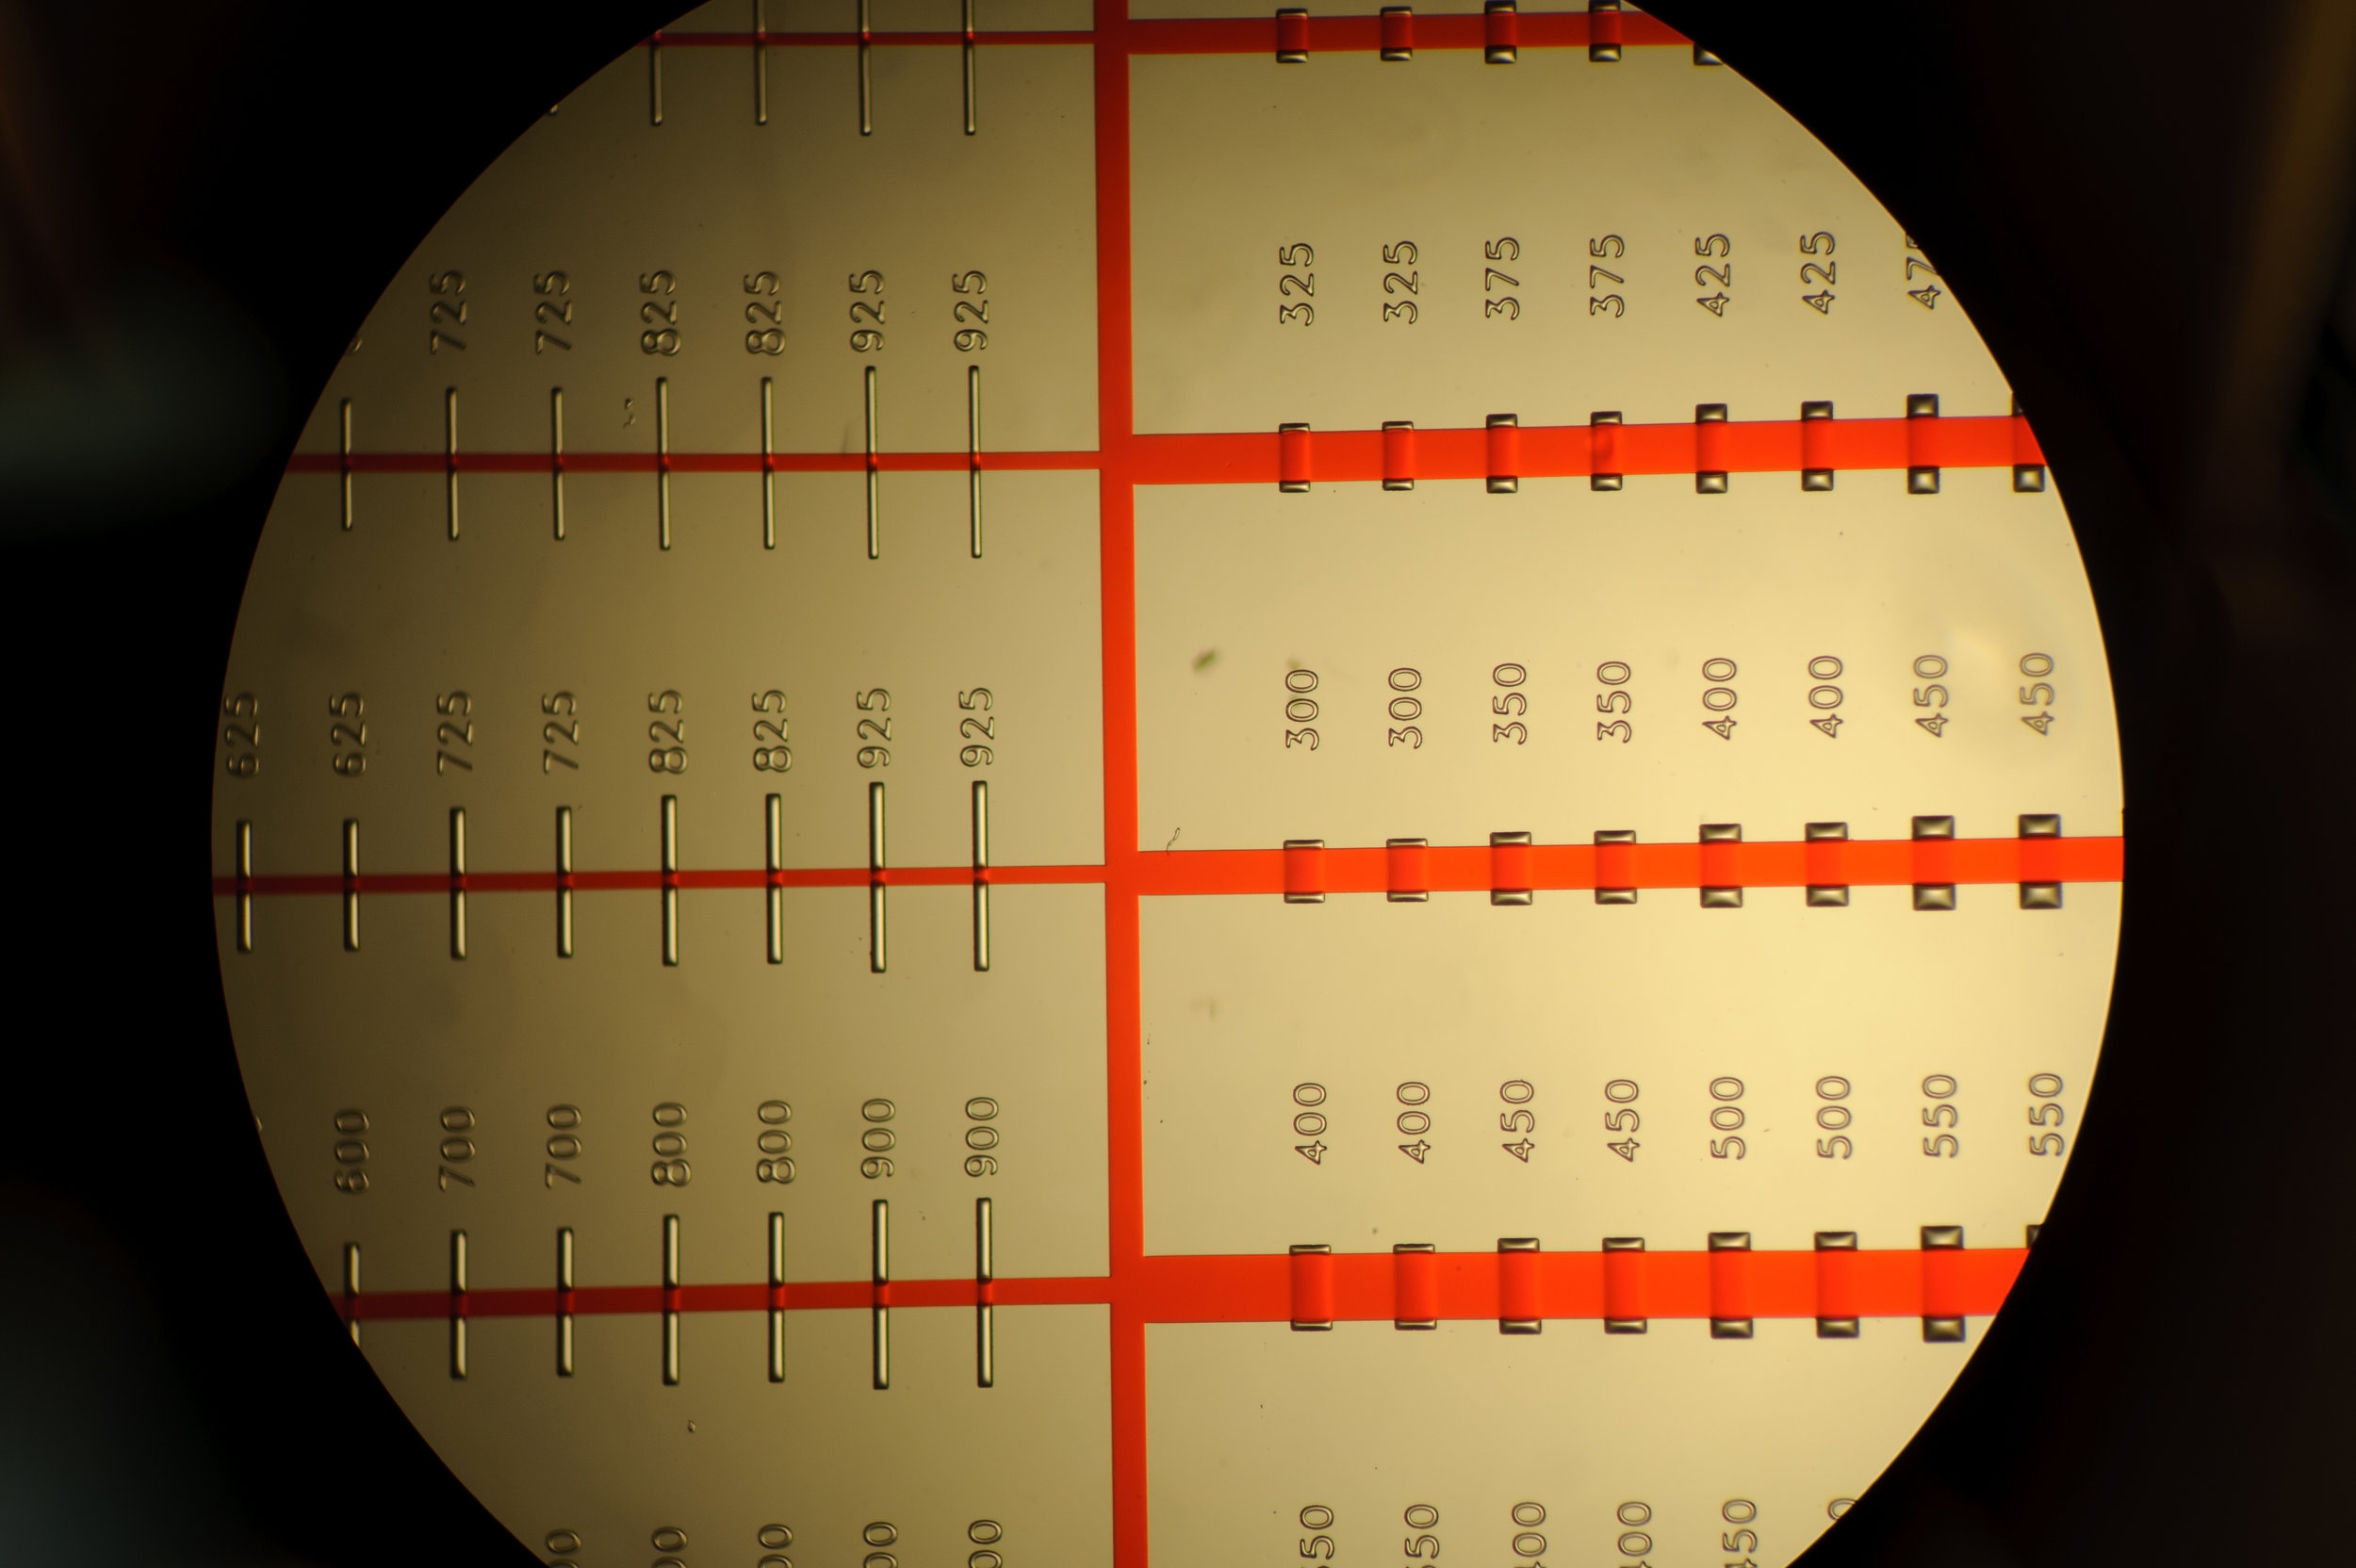   Systematic characterization of feature dimensions and closing pressures for microfluidic valves produced via photoresist reflow. &nbsp; Fordyce, P.M. , Diaz-Botia, C.A., DeRisi, J.L., &amp; Gomez-Sjoberg, R.&nbsp; Lab on a Chip  (2012).  ( pdf ) ( 